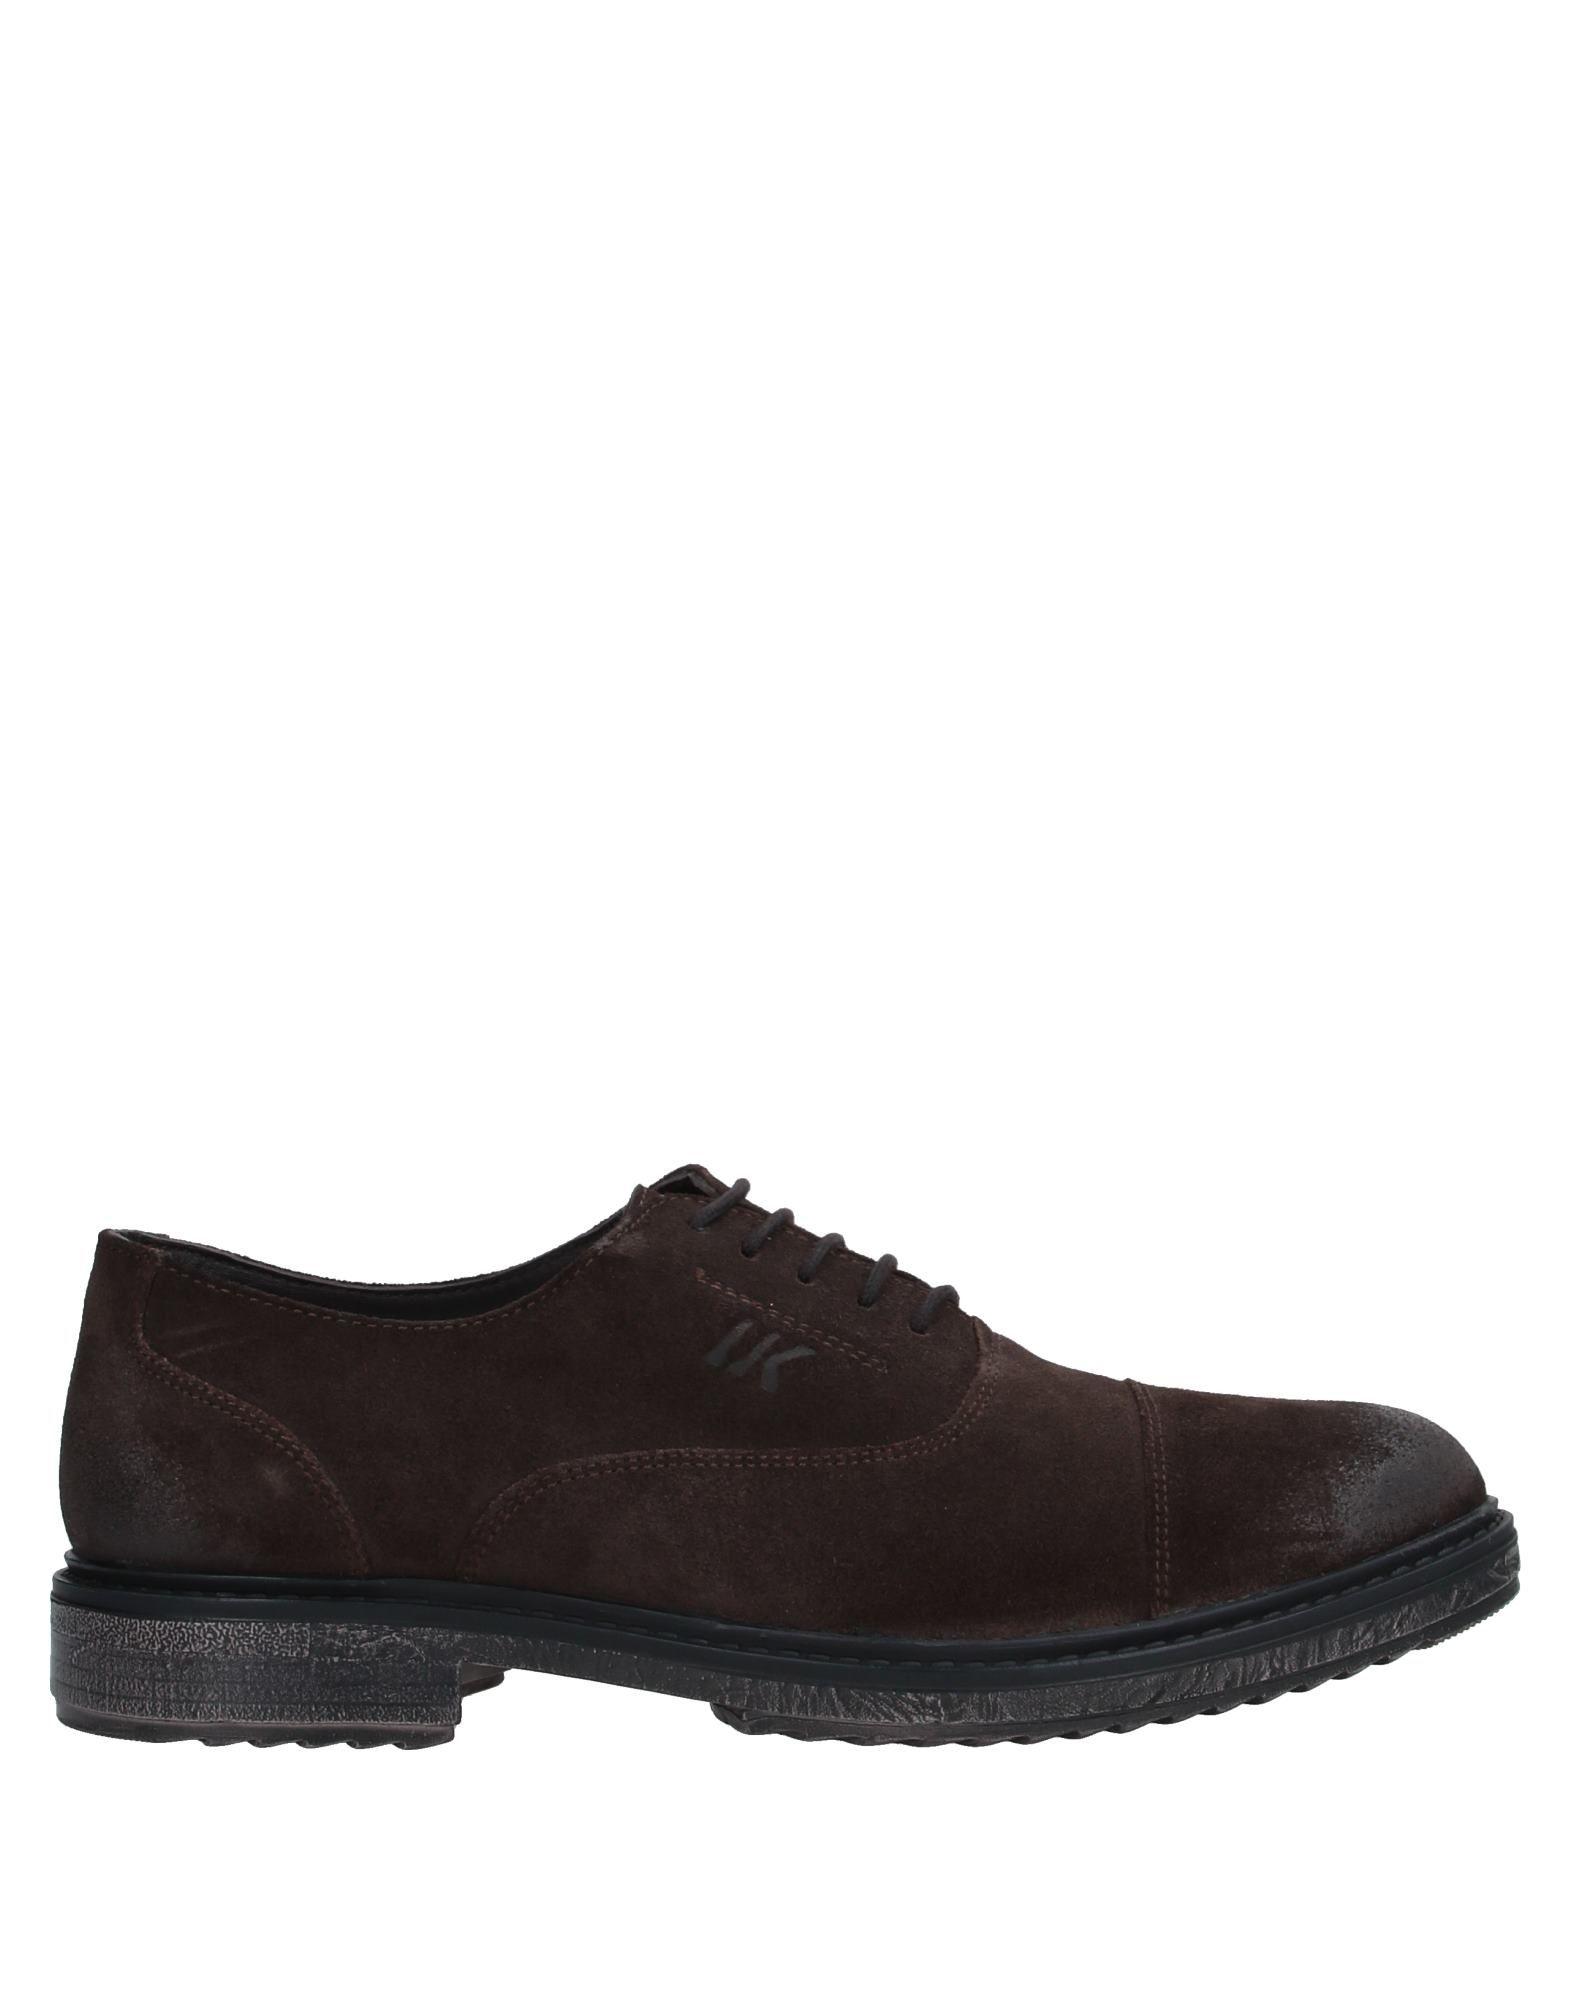 Lumberjack Leather Lace-up Shoe in Cocoa (Brown) for Men - Lyst